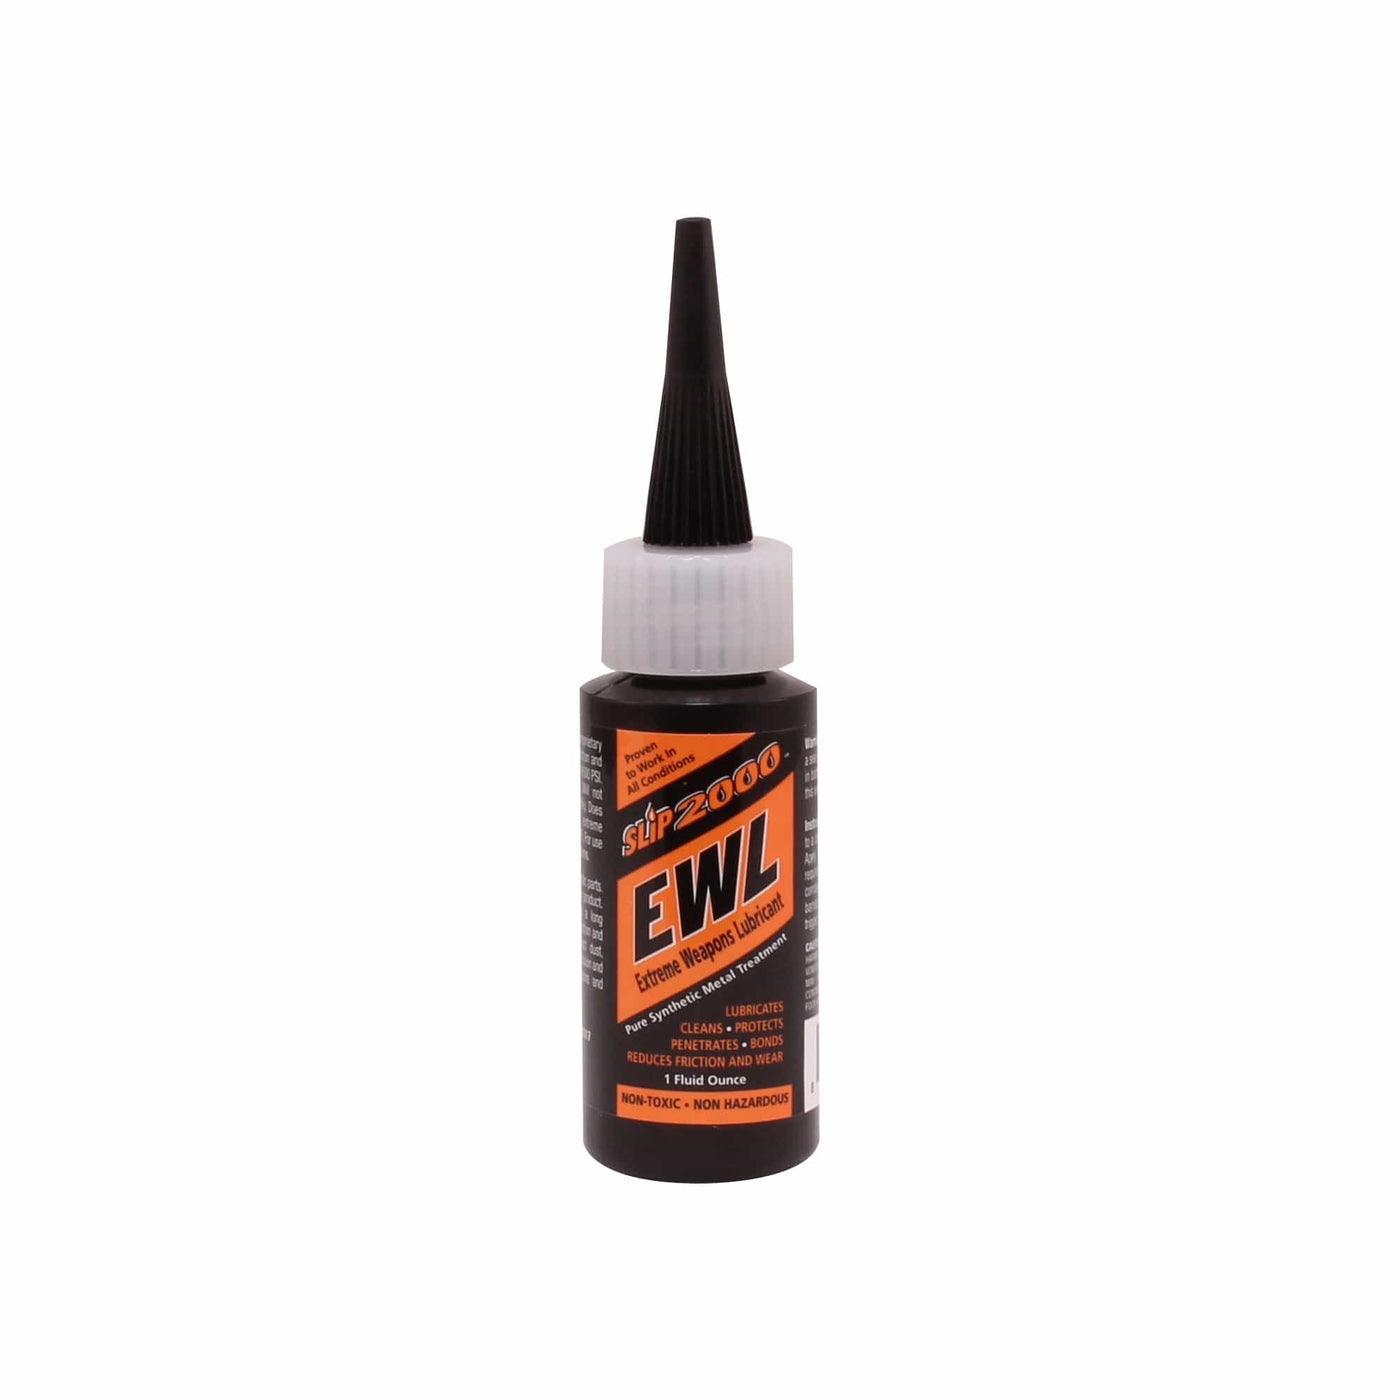 Slip 2000 Slip 2000 1oz. Ewl Extreme - Weapons Lubricant Cleaning And Gun Care